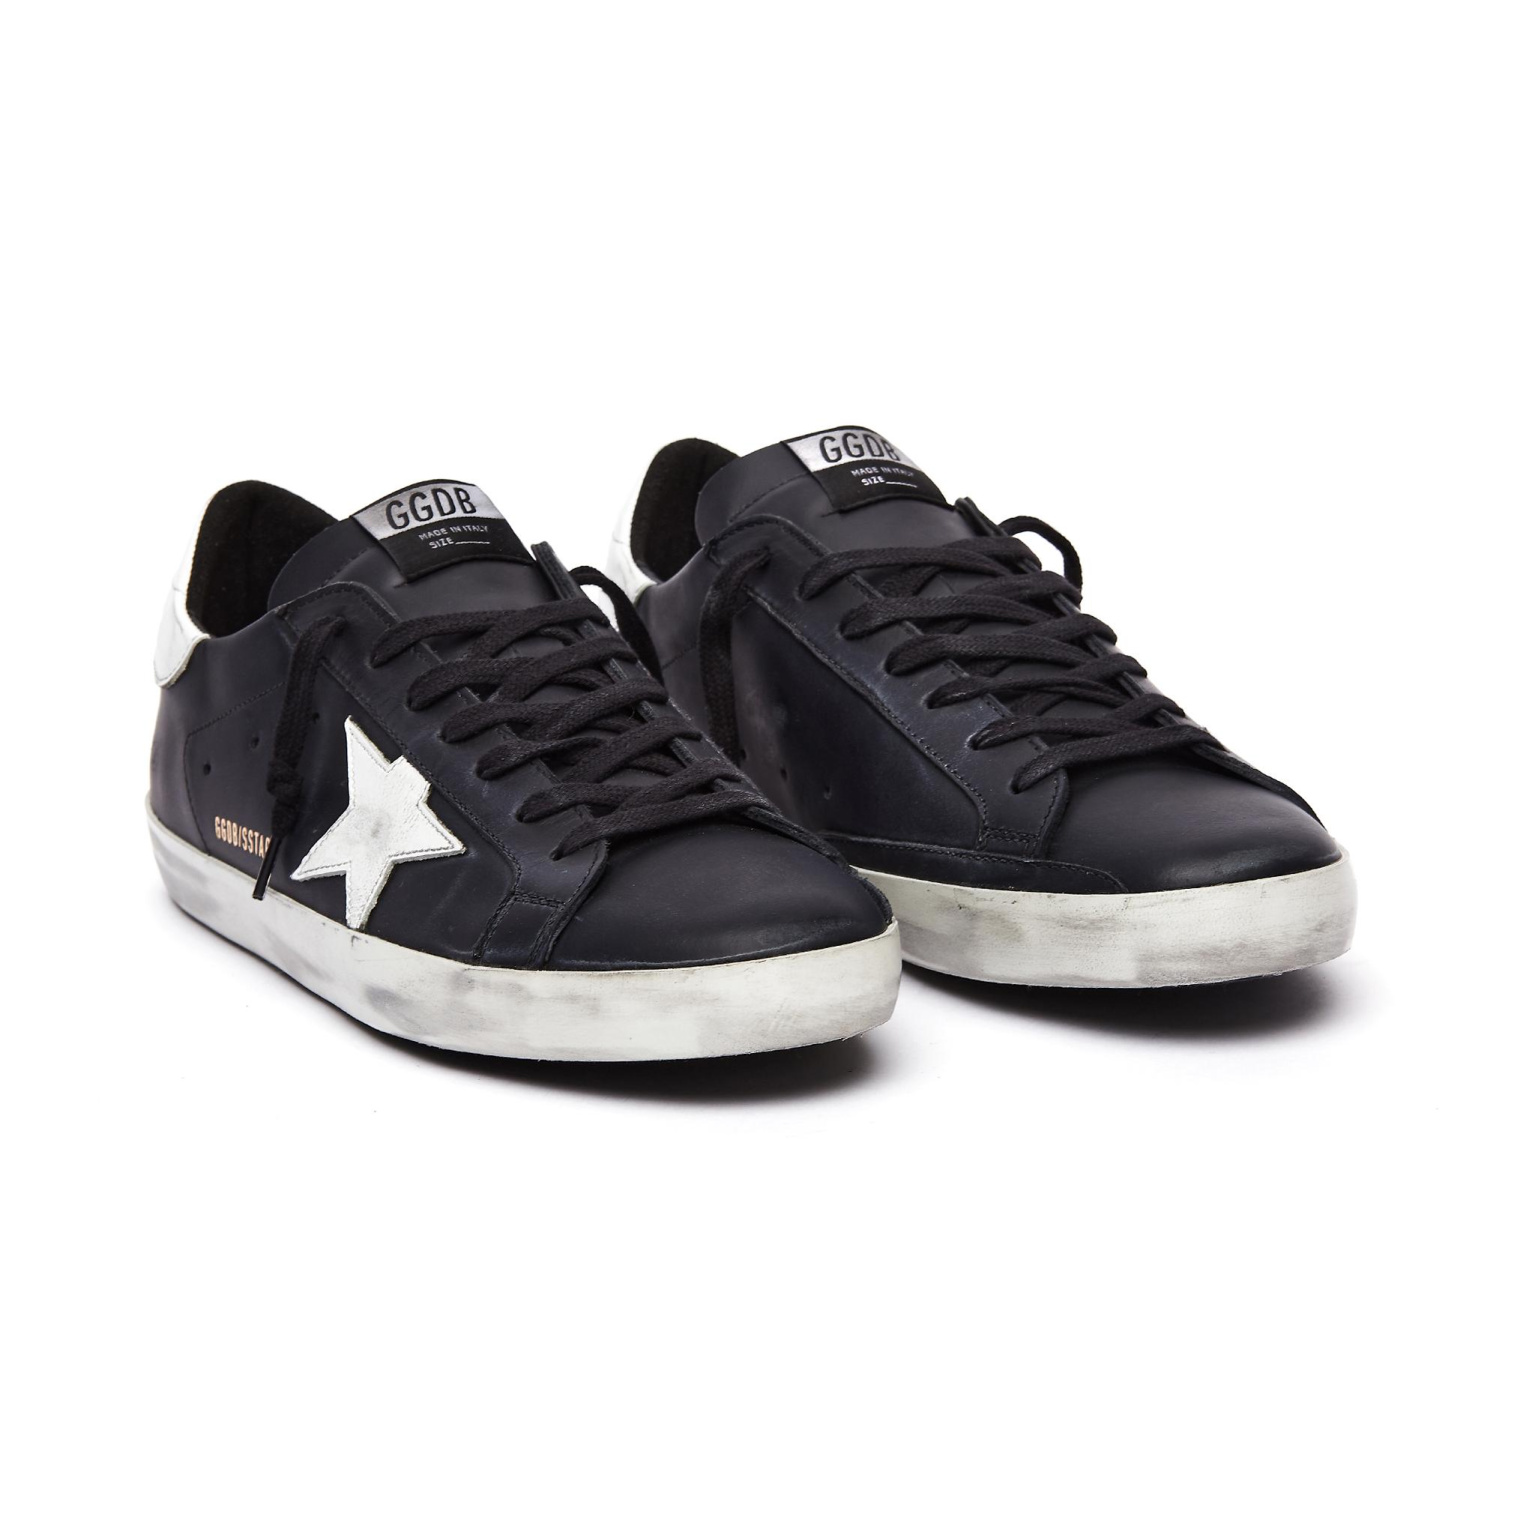 Golden Goose Black & White Leather Superstar Sneakers